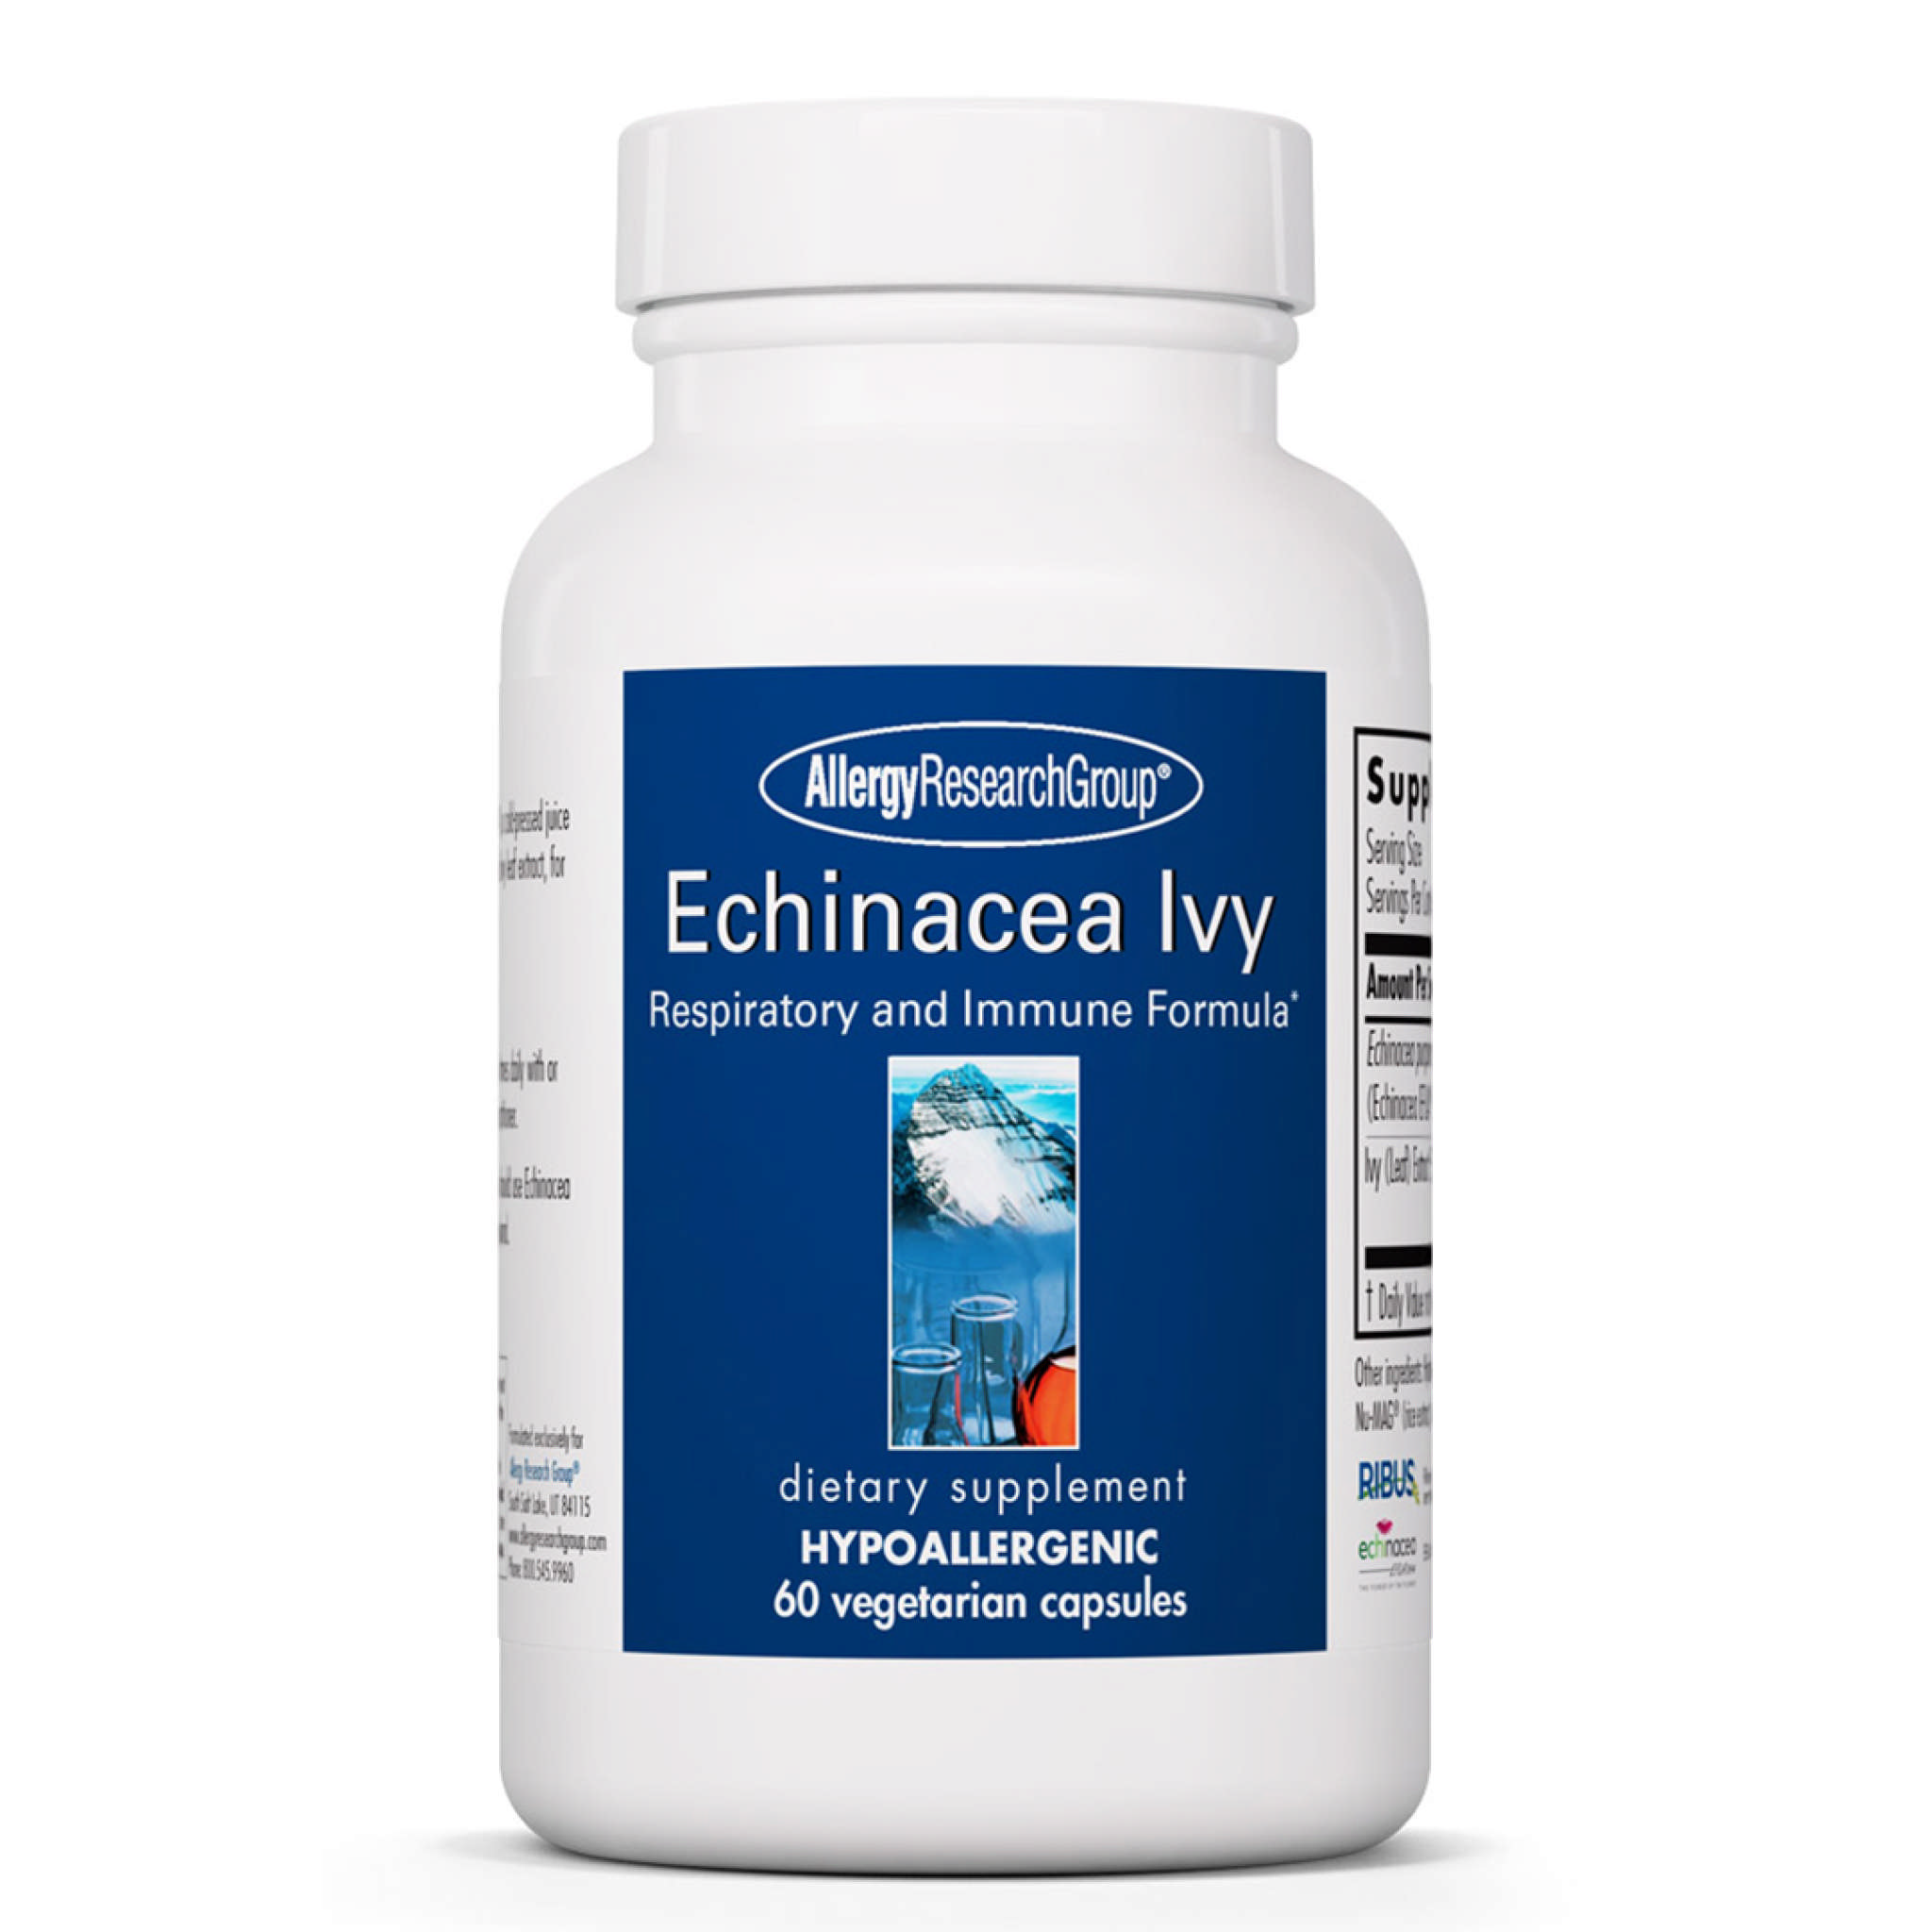 Allergy Research Group - Echinacea Ivy